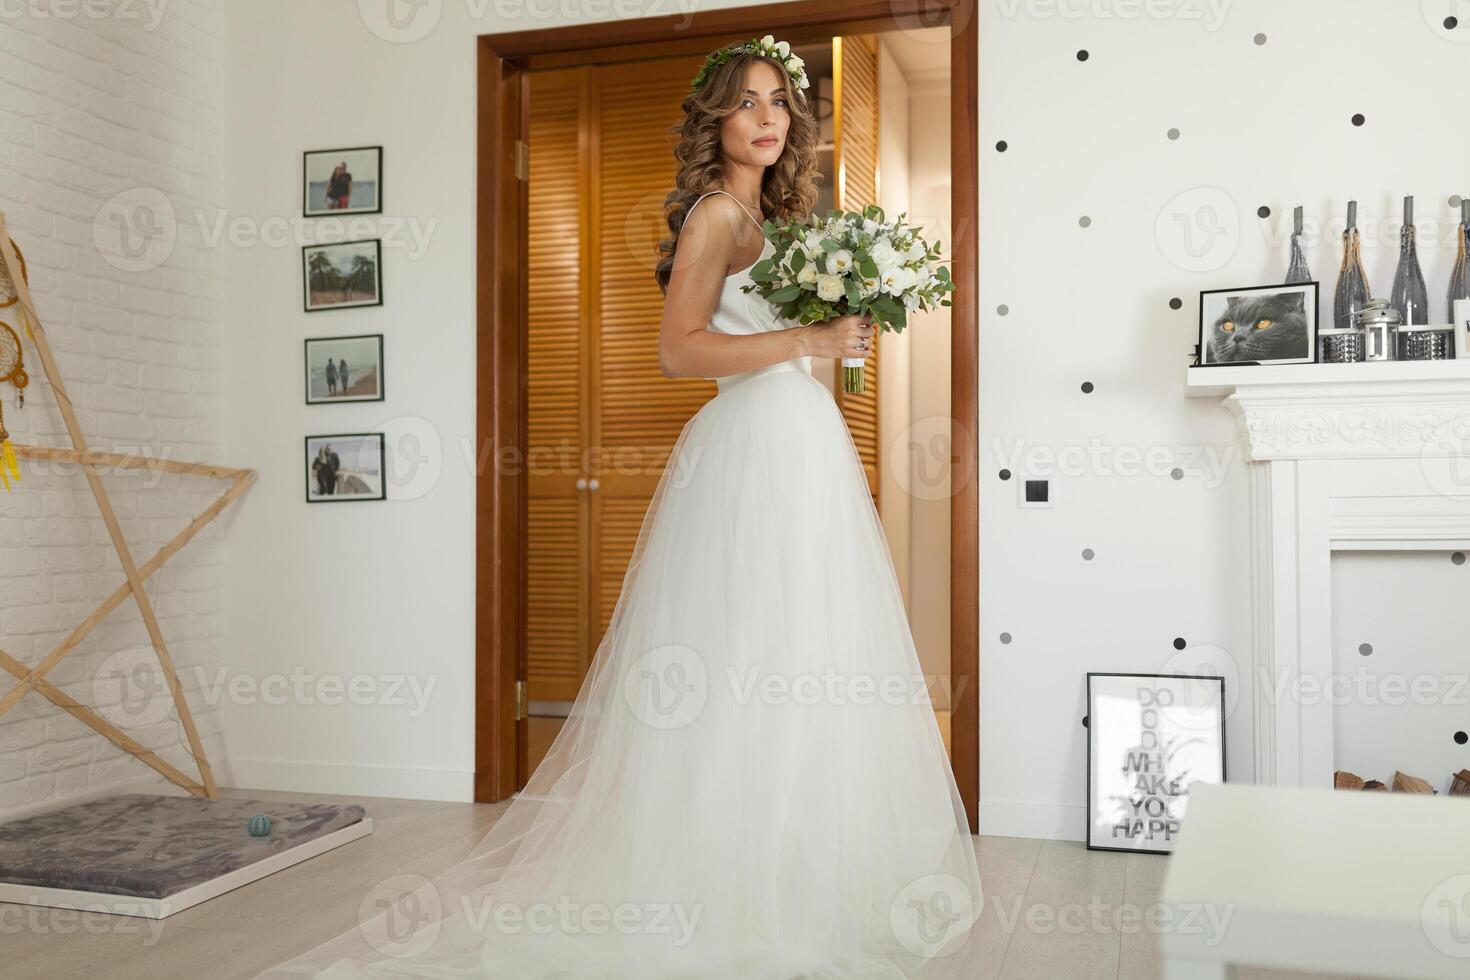 The bride in a beautiful wedding dress with a long curly hair stands in the bedroom and looks at the camera. Bride indoors with white flowers bouquet and tender wreath hairstyle photo